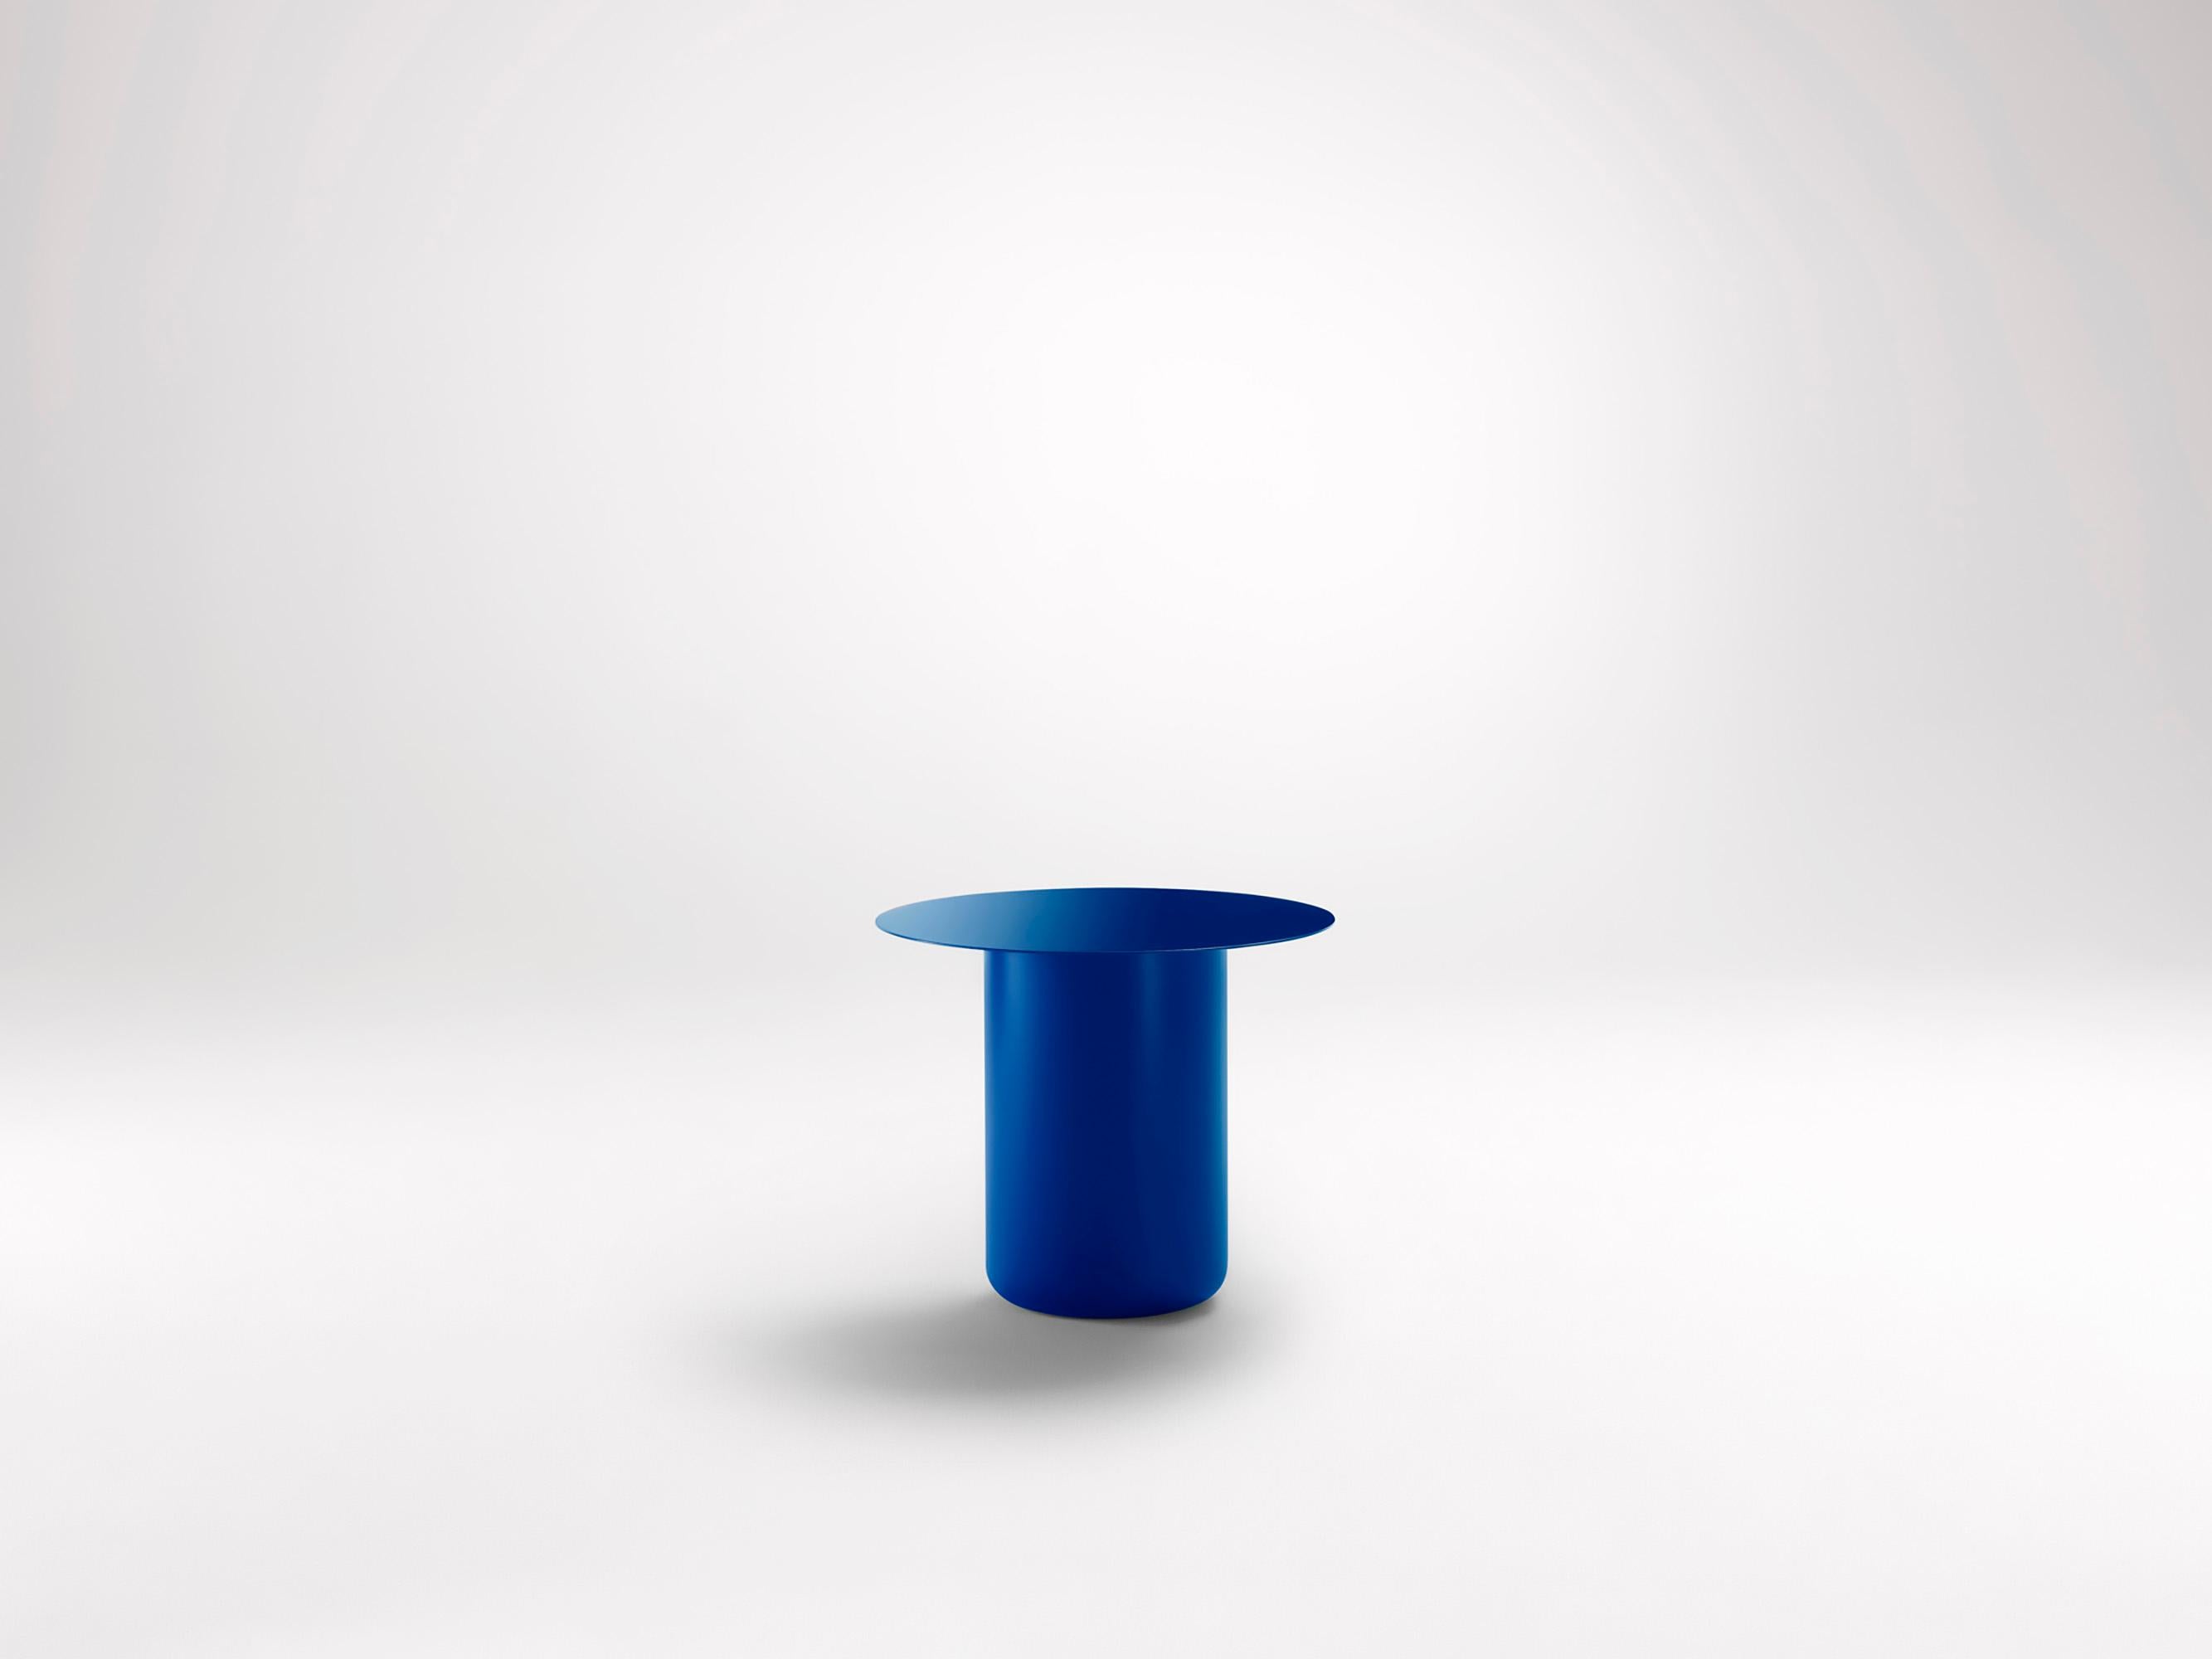 Vivid Blue Table 01 by Coco Flip
Dimensions: D 48 x W 48 x H 32 / 36 / 40 / 42 cm
Materials: Mild steel, powder-coated with zinc undercoat. 
Weight: 12kg

Coco Flip is a Melbourne based furniture and lighting design studio, run by us, Kate Stokes